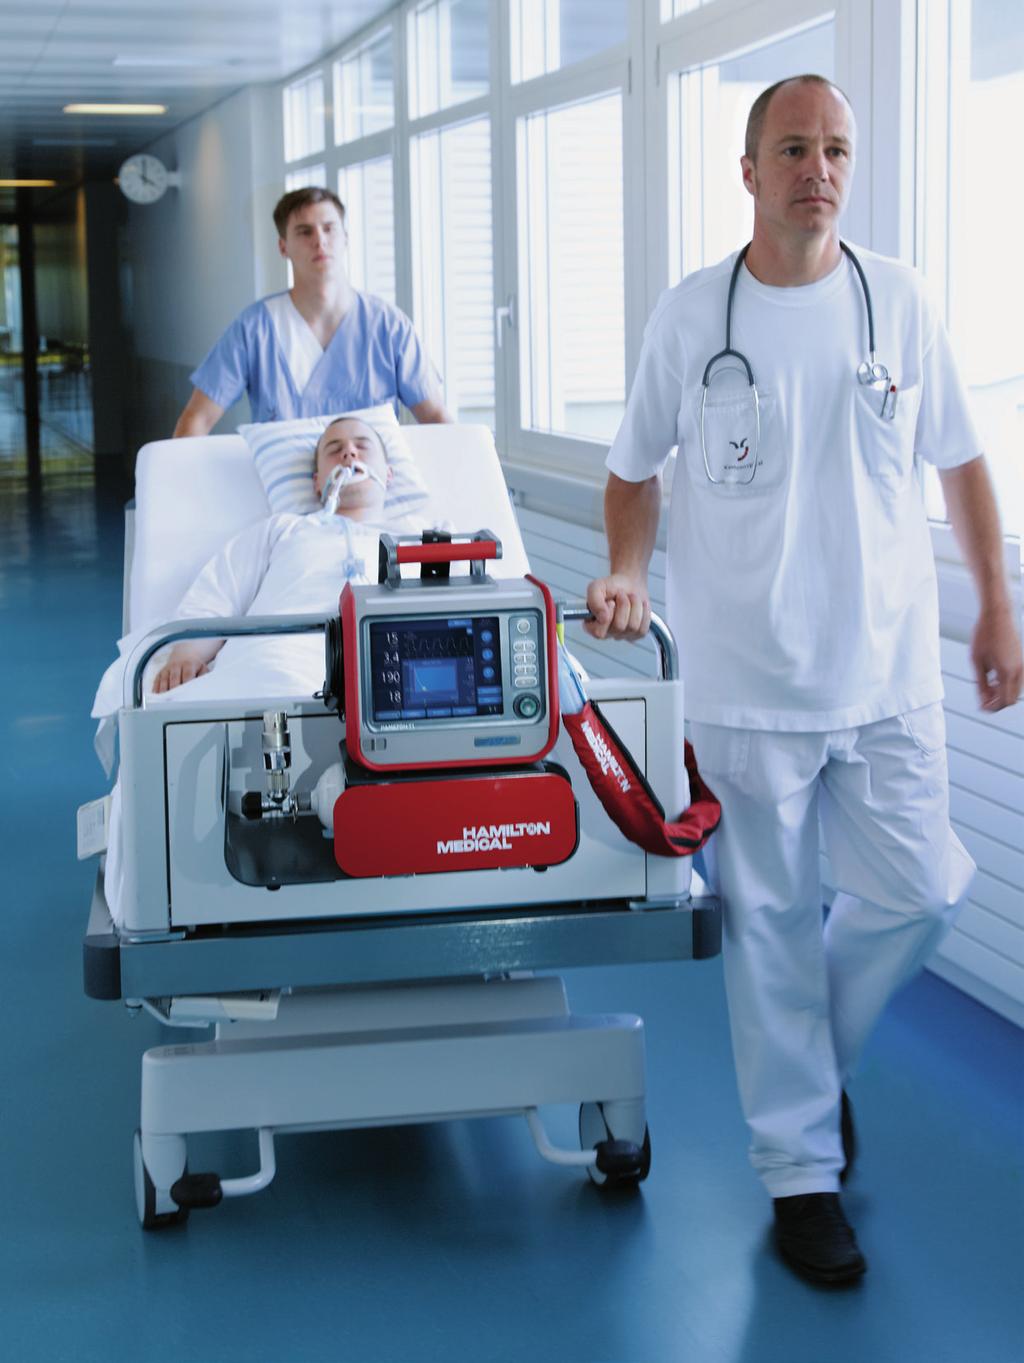 - Patients in the medical intensive care unit could be